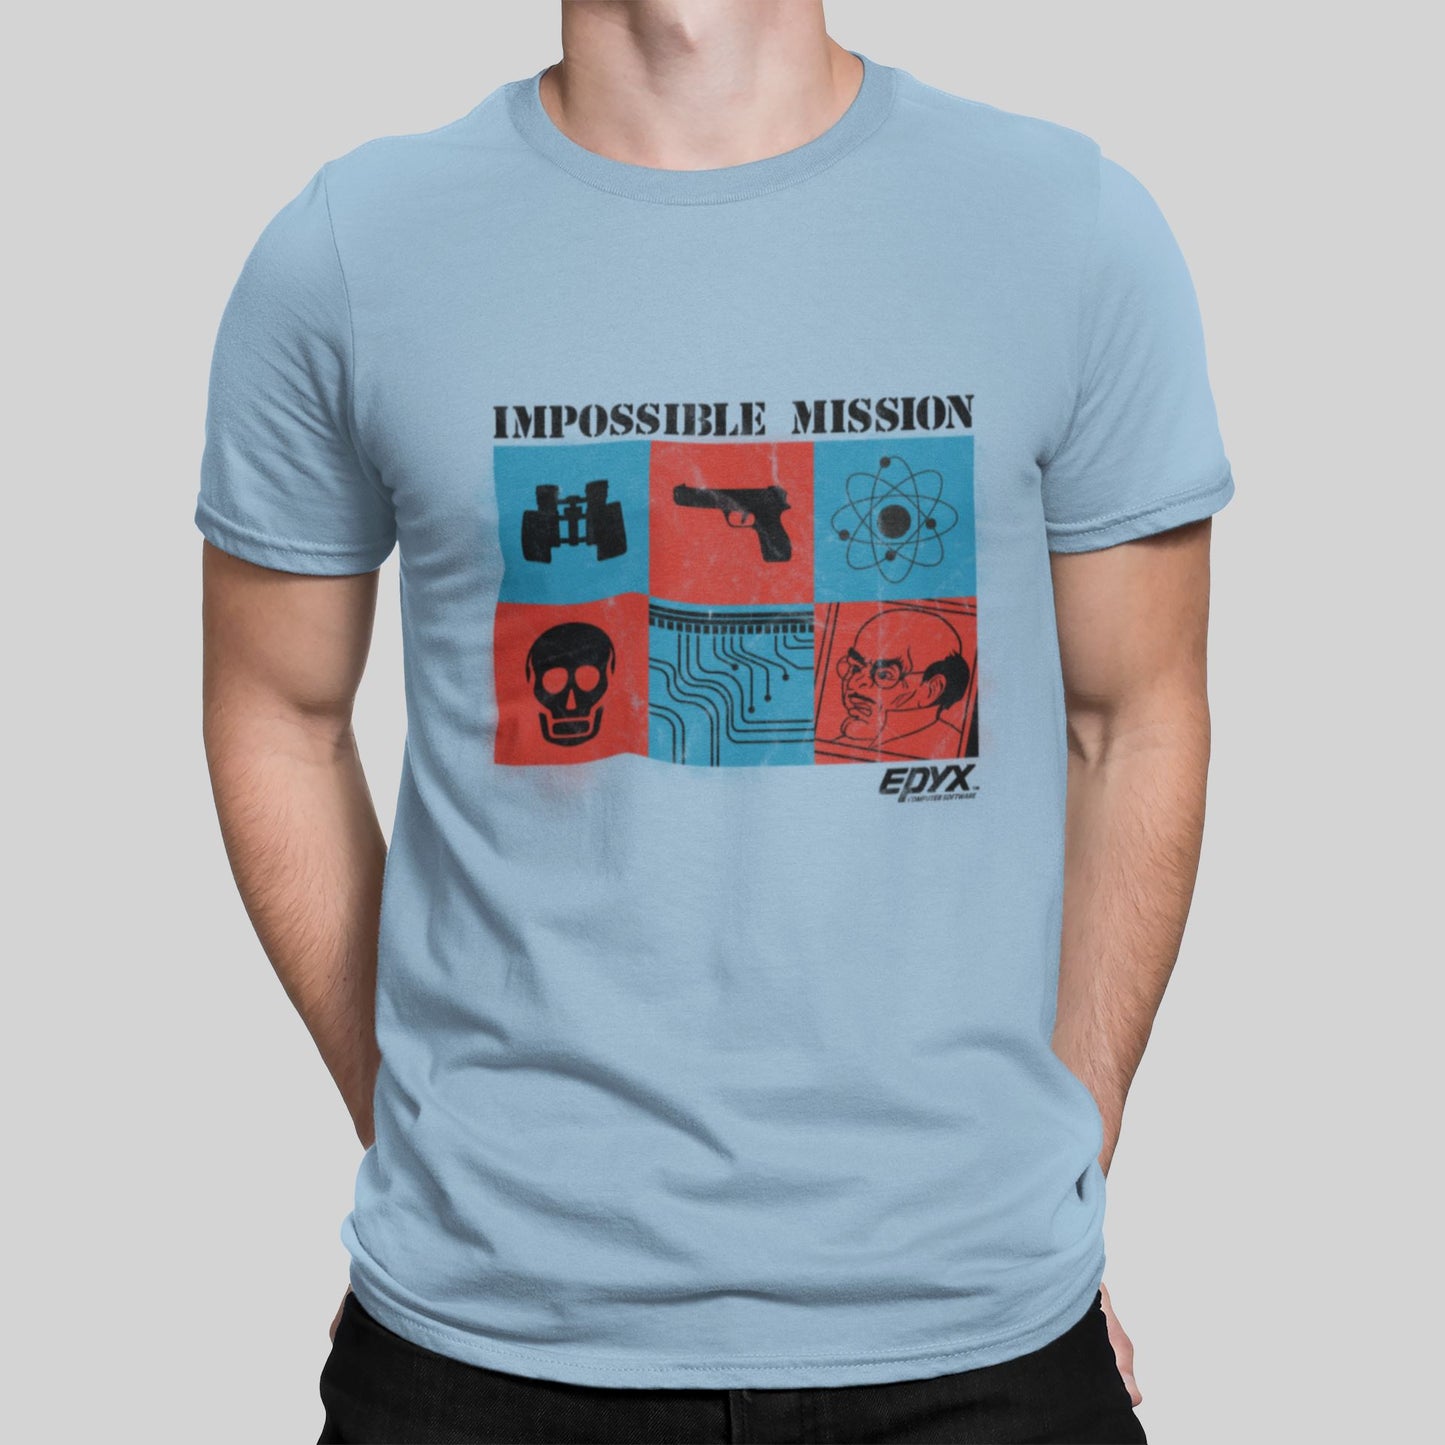 Impossible Mission Retro Gaming T-Shirt T-Shirt Seven Squared Small 34-36" Light Blue 